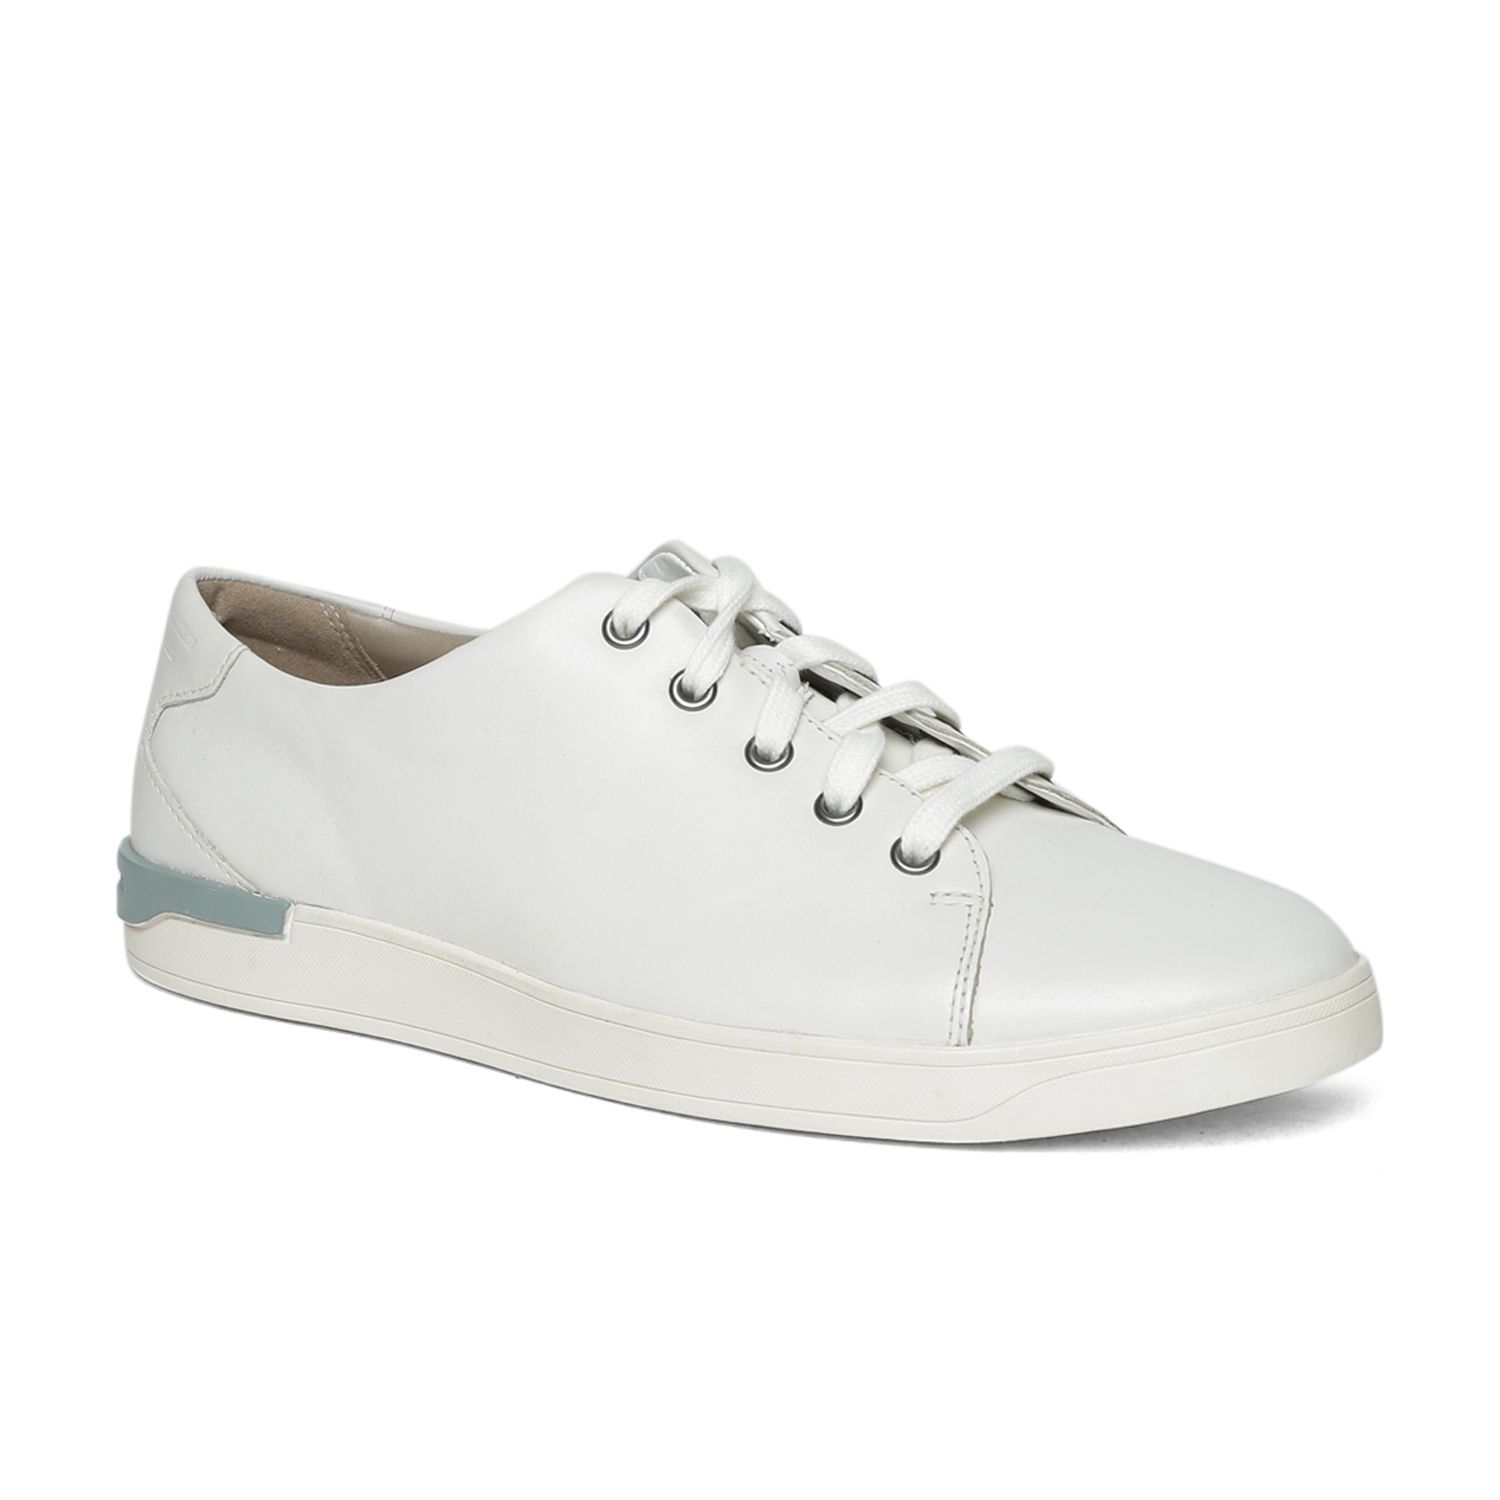 Clarks Sneakers White Casual Shoes - Buy Clarks Sneakers White Casual ...